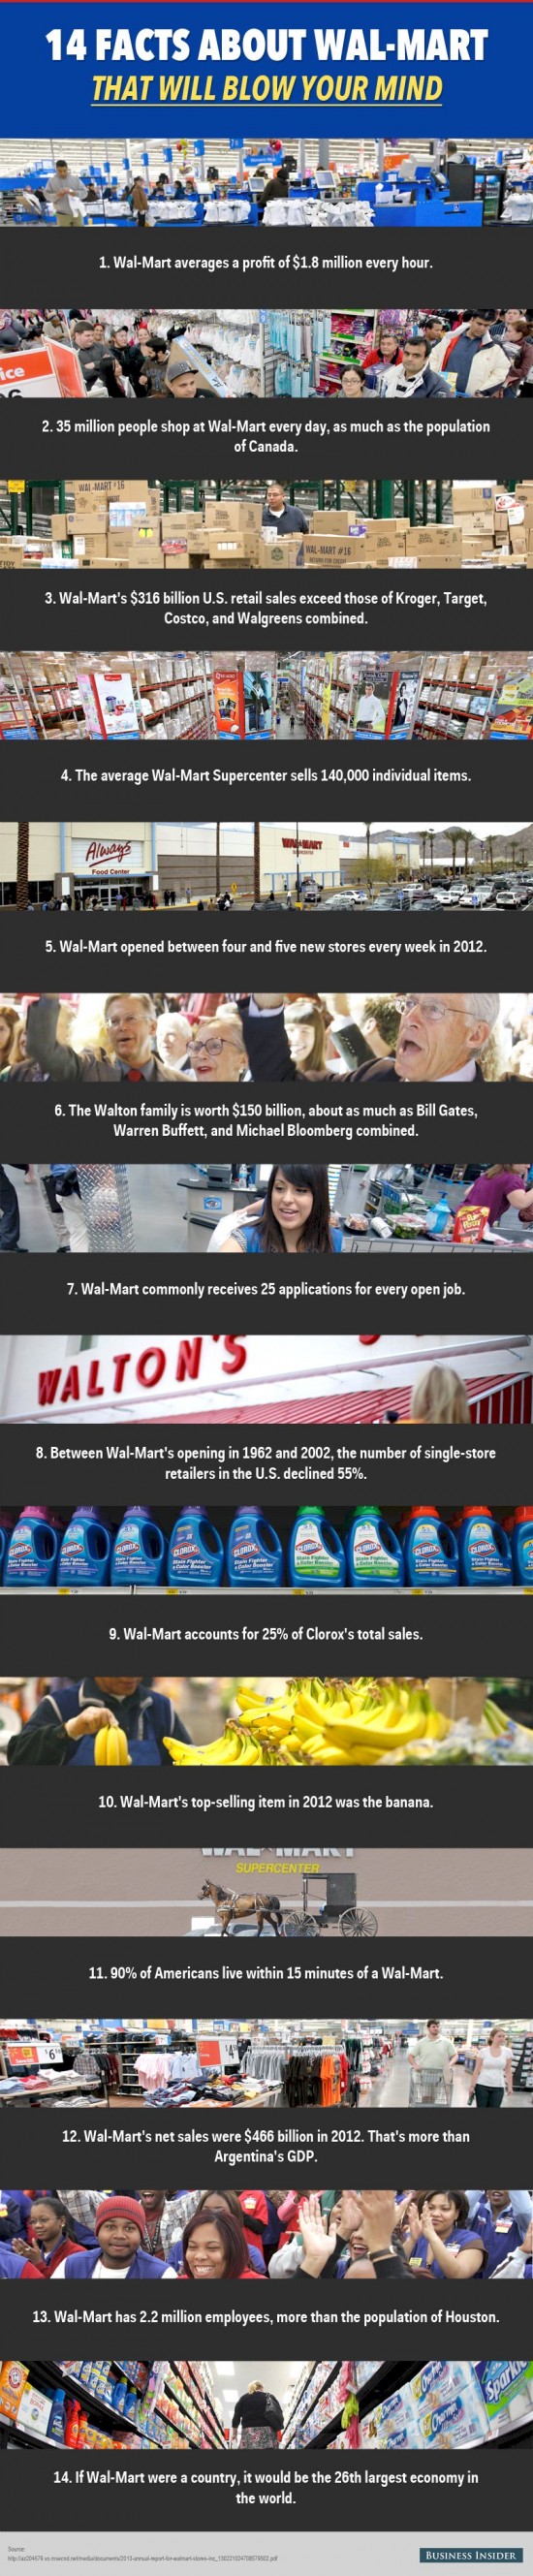 walmart facts infographic